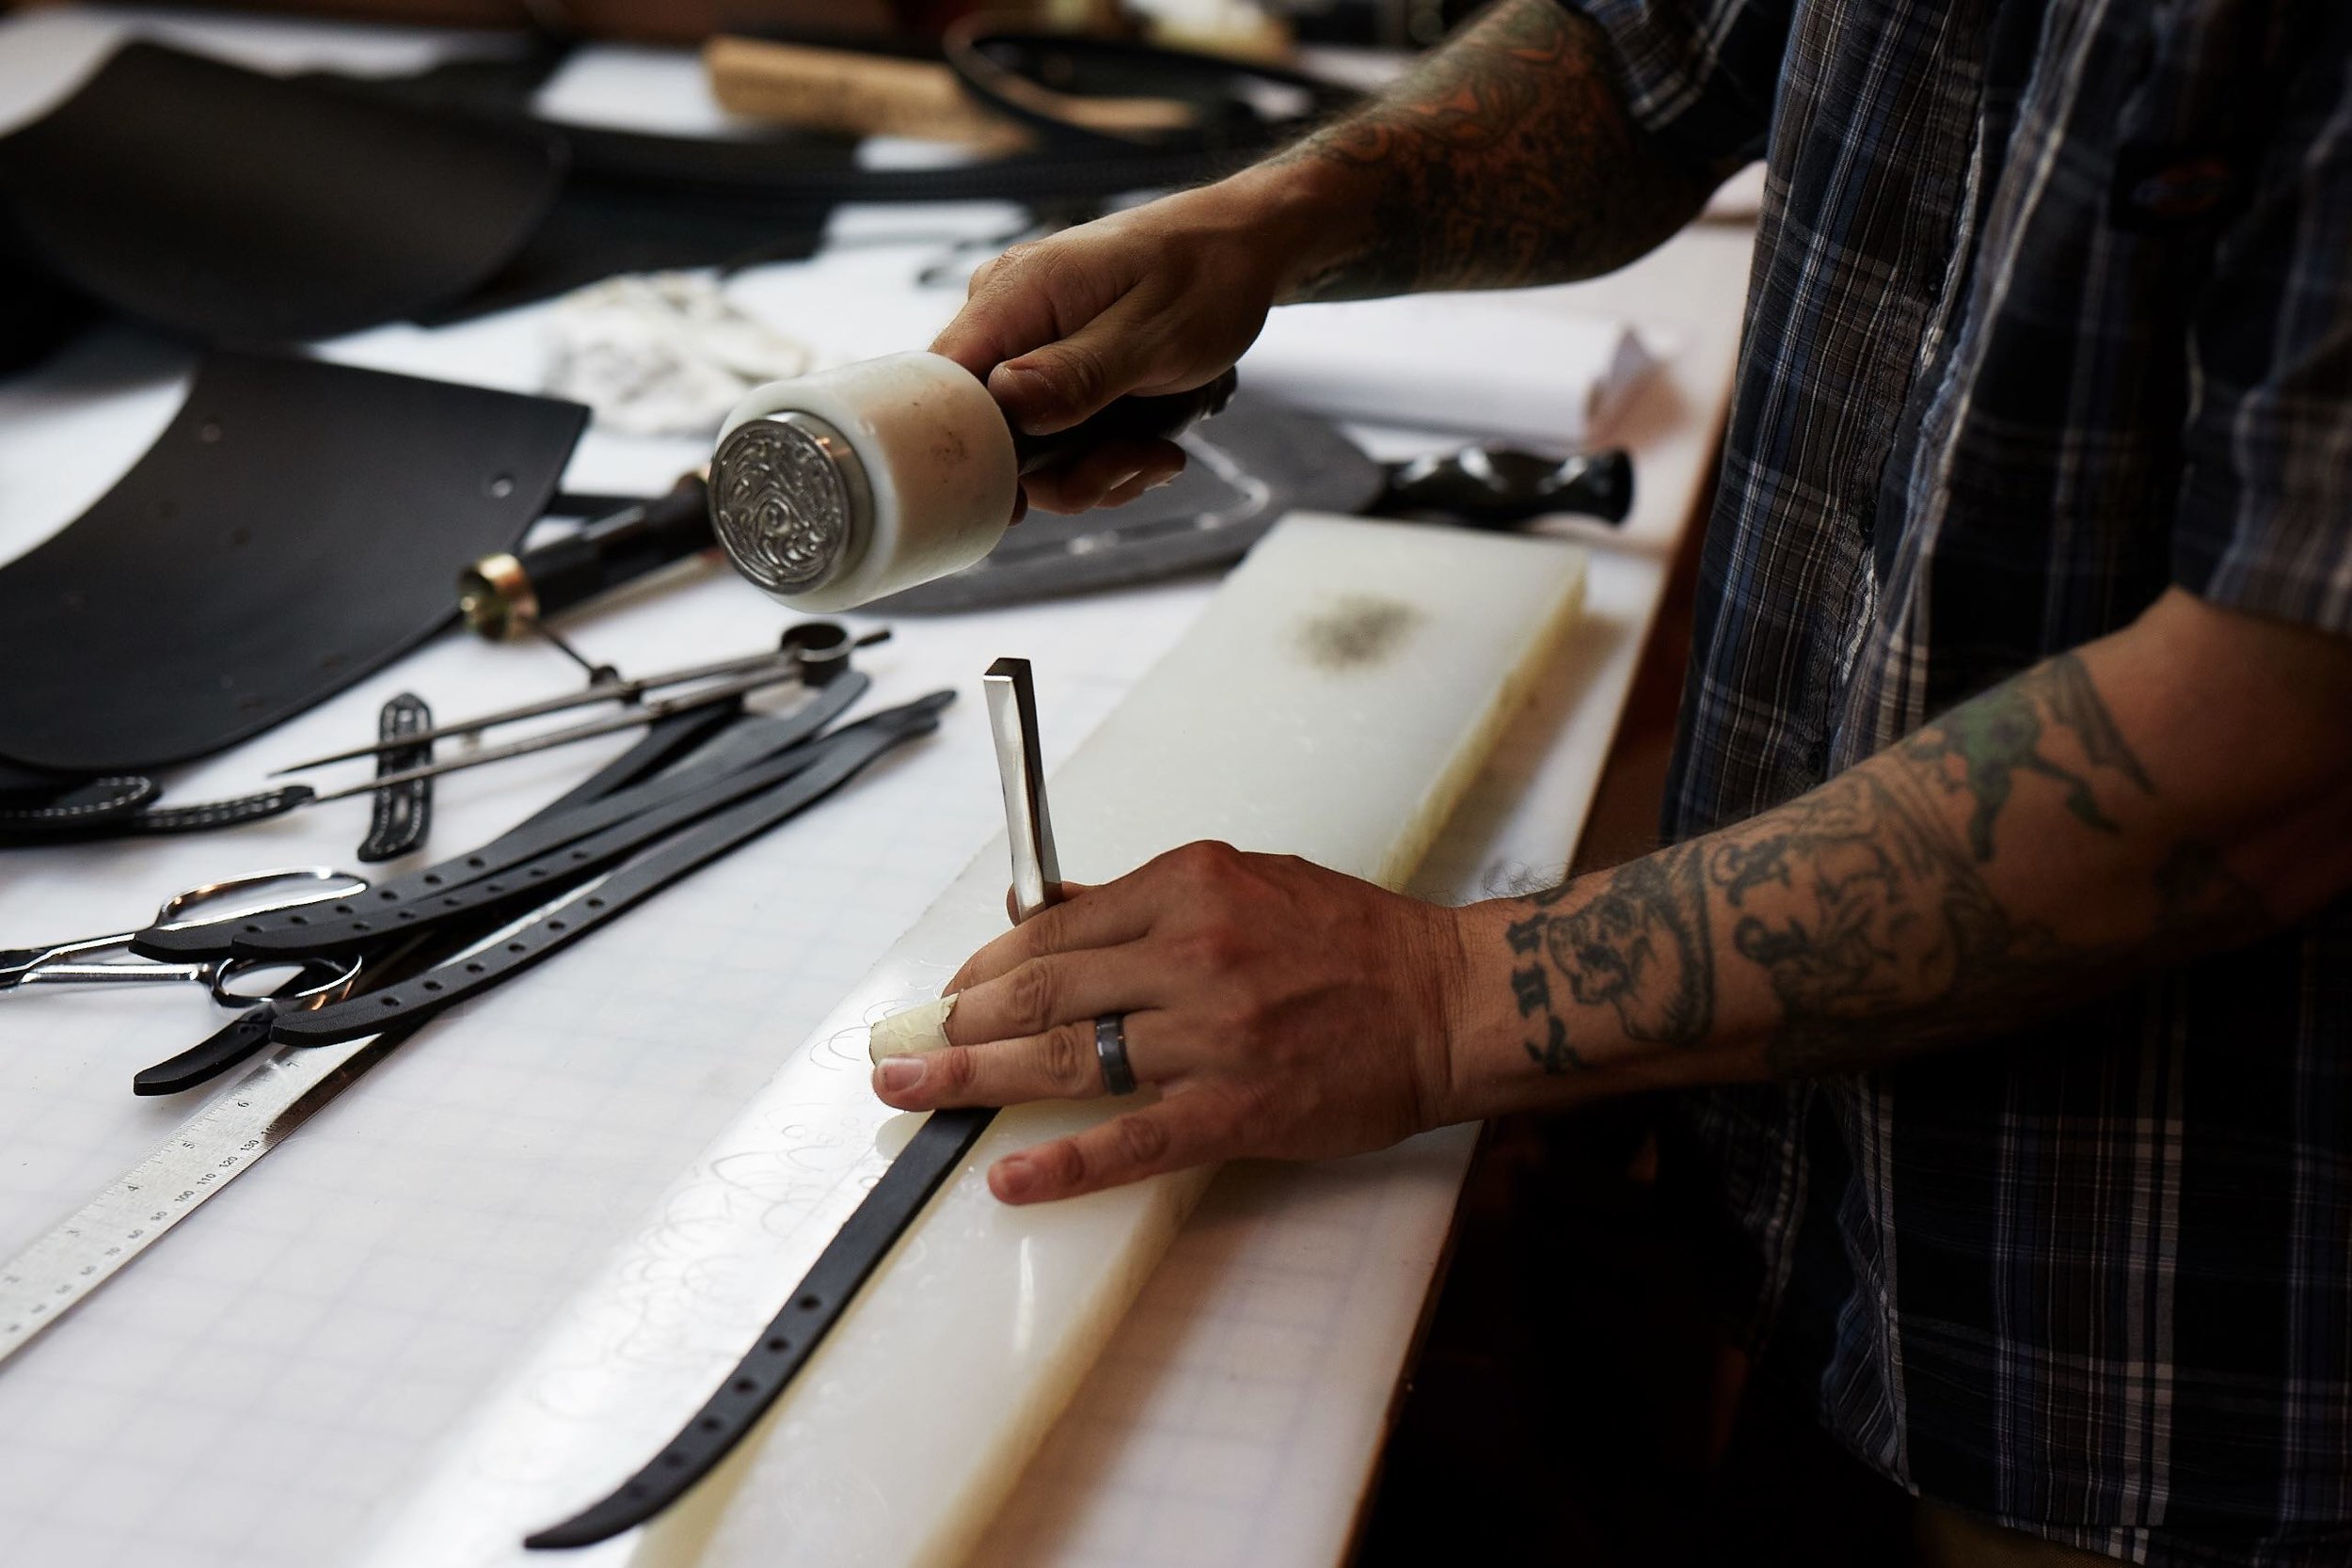 Jay Teske Leather Co. makes all of their products in their Kingston, New York workshop. Photo by Brandon Schulman.